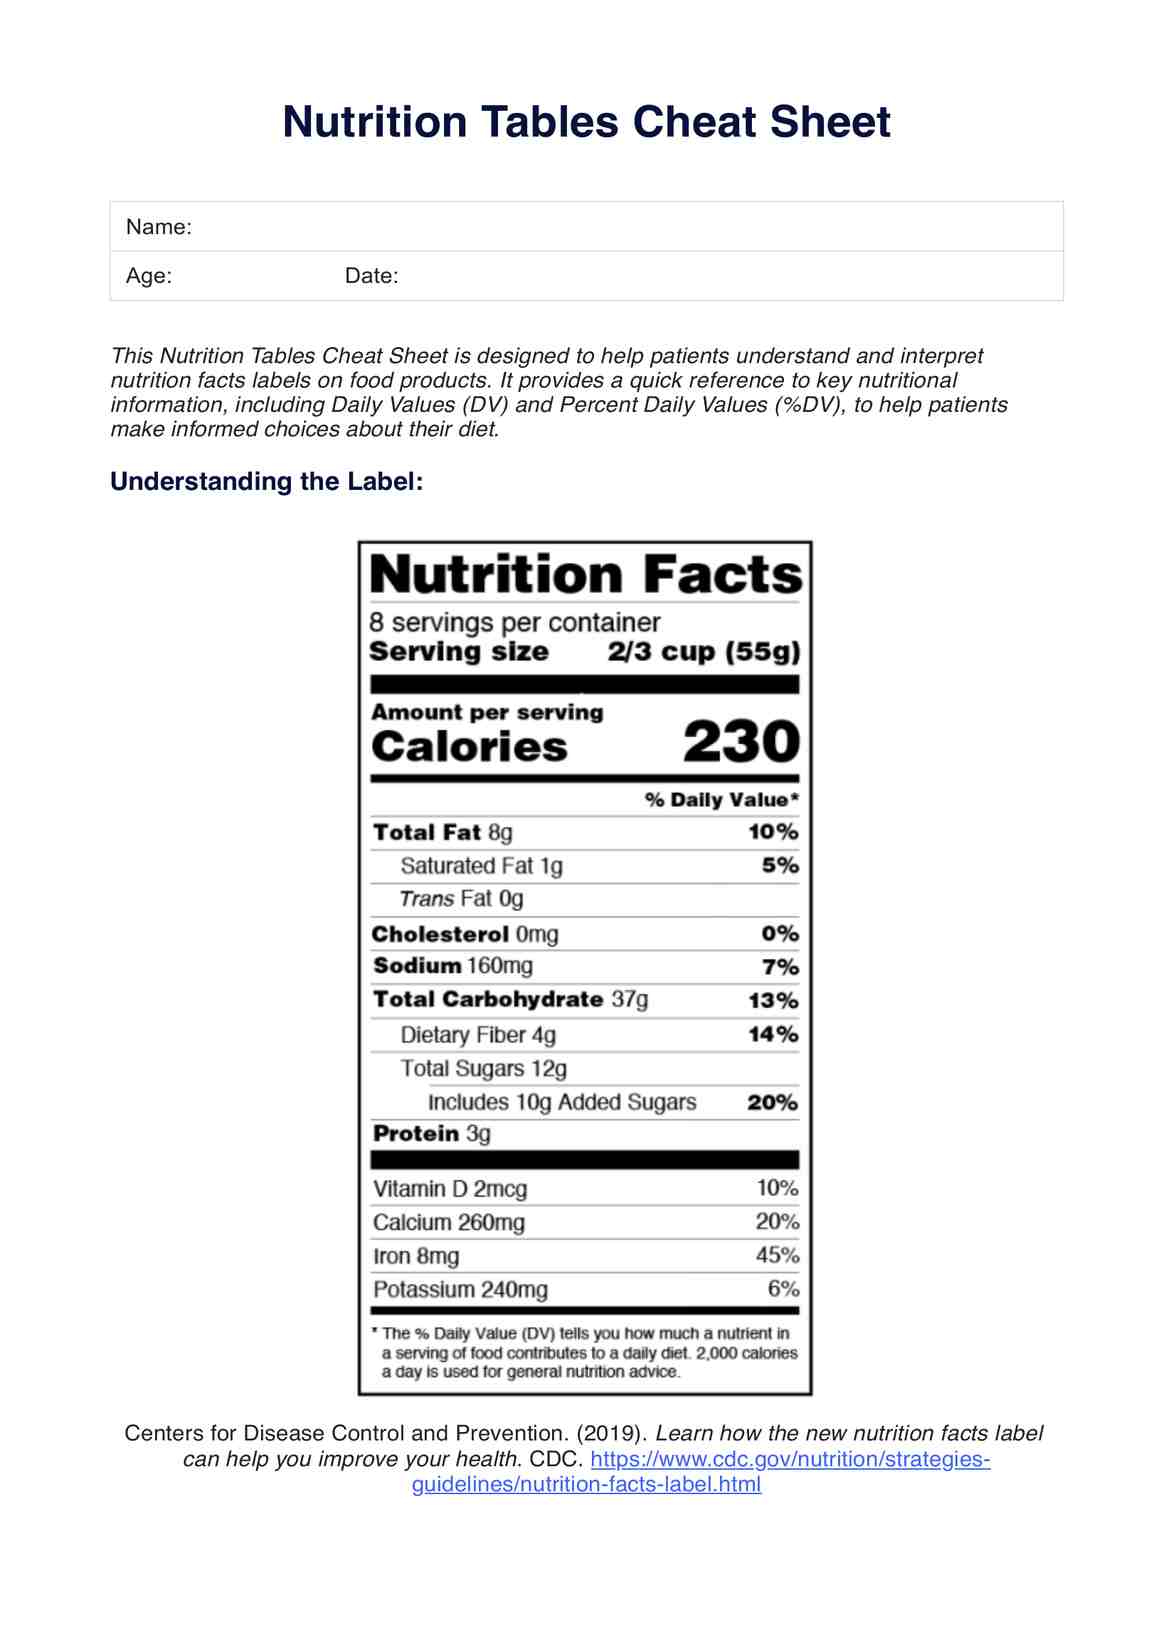 Nutrition Tables Cheat Sheet PDF Example